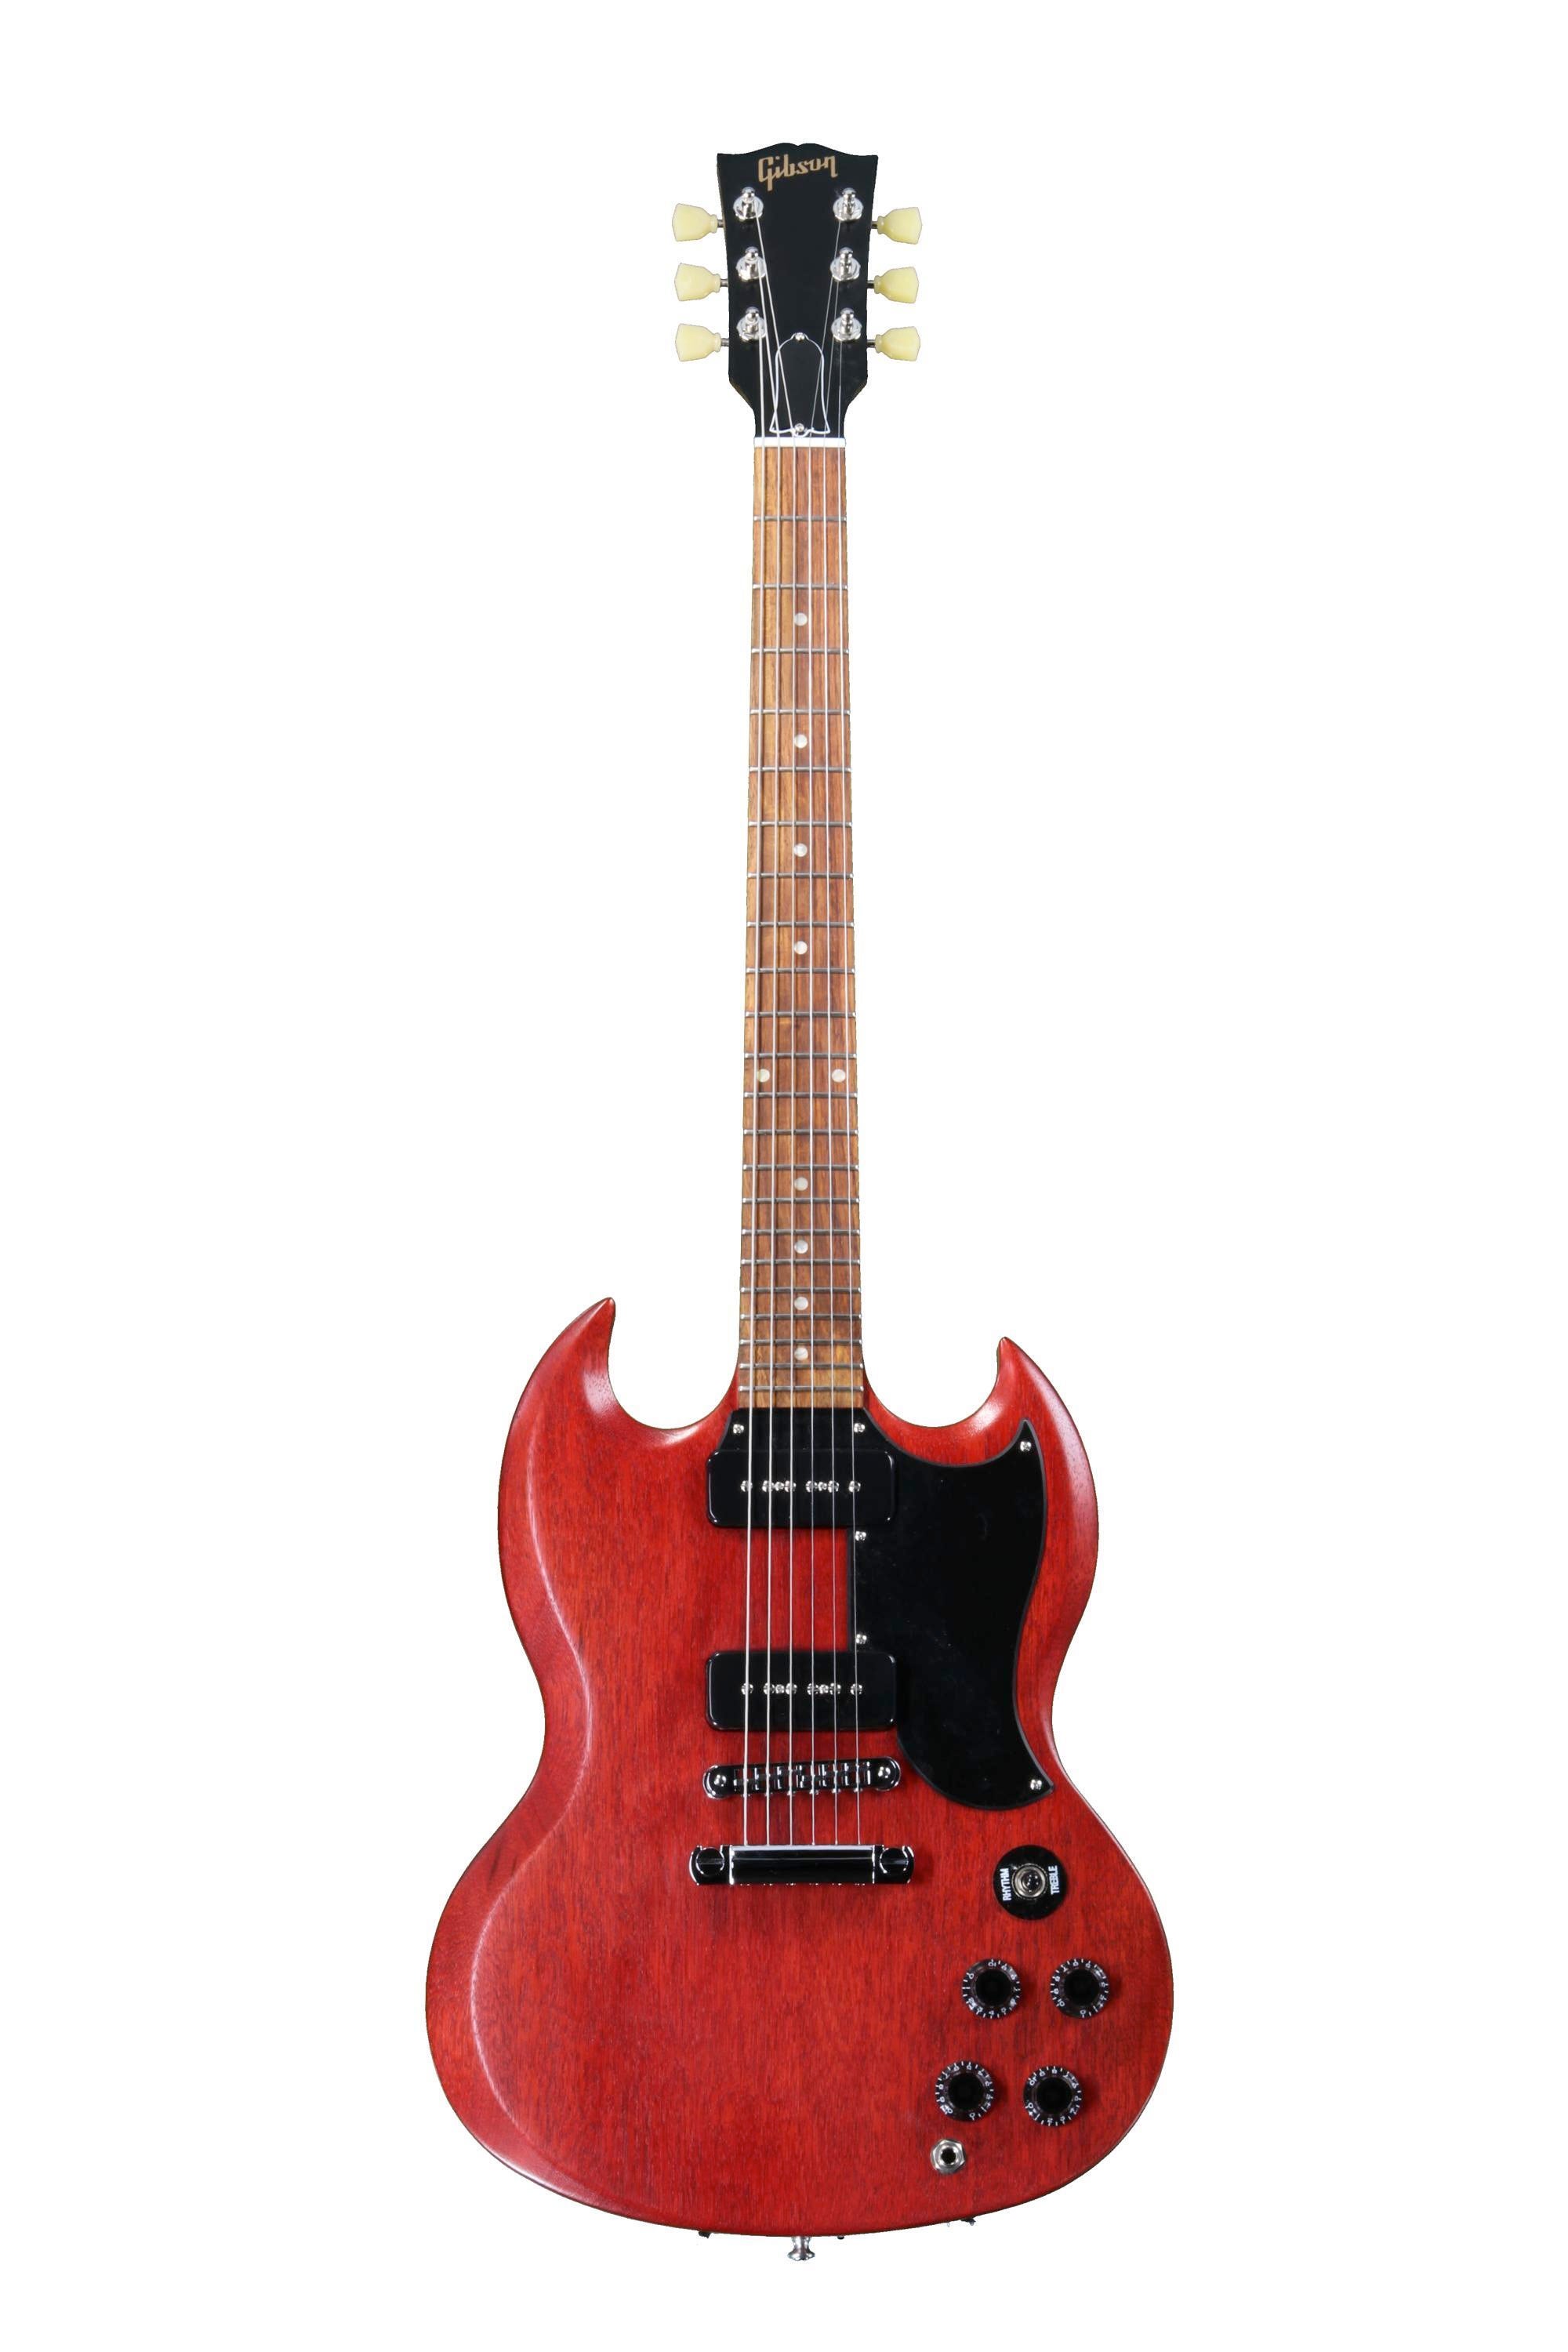 Gibson Limited Edition SG Special '60s Tribute - Worn Cherry | Sweetwater